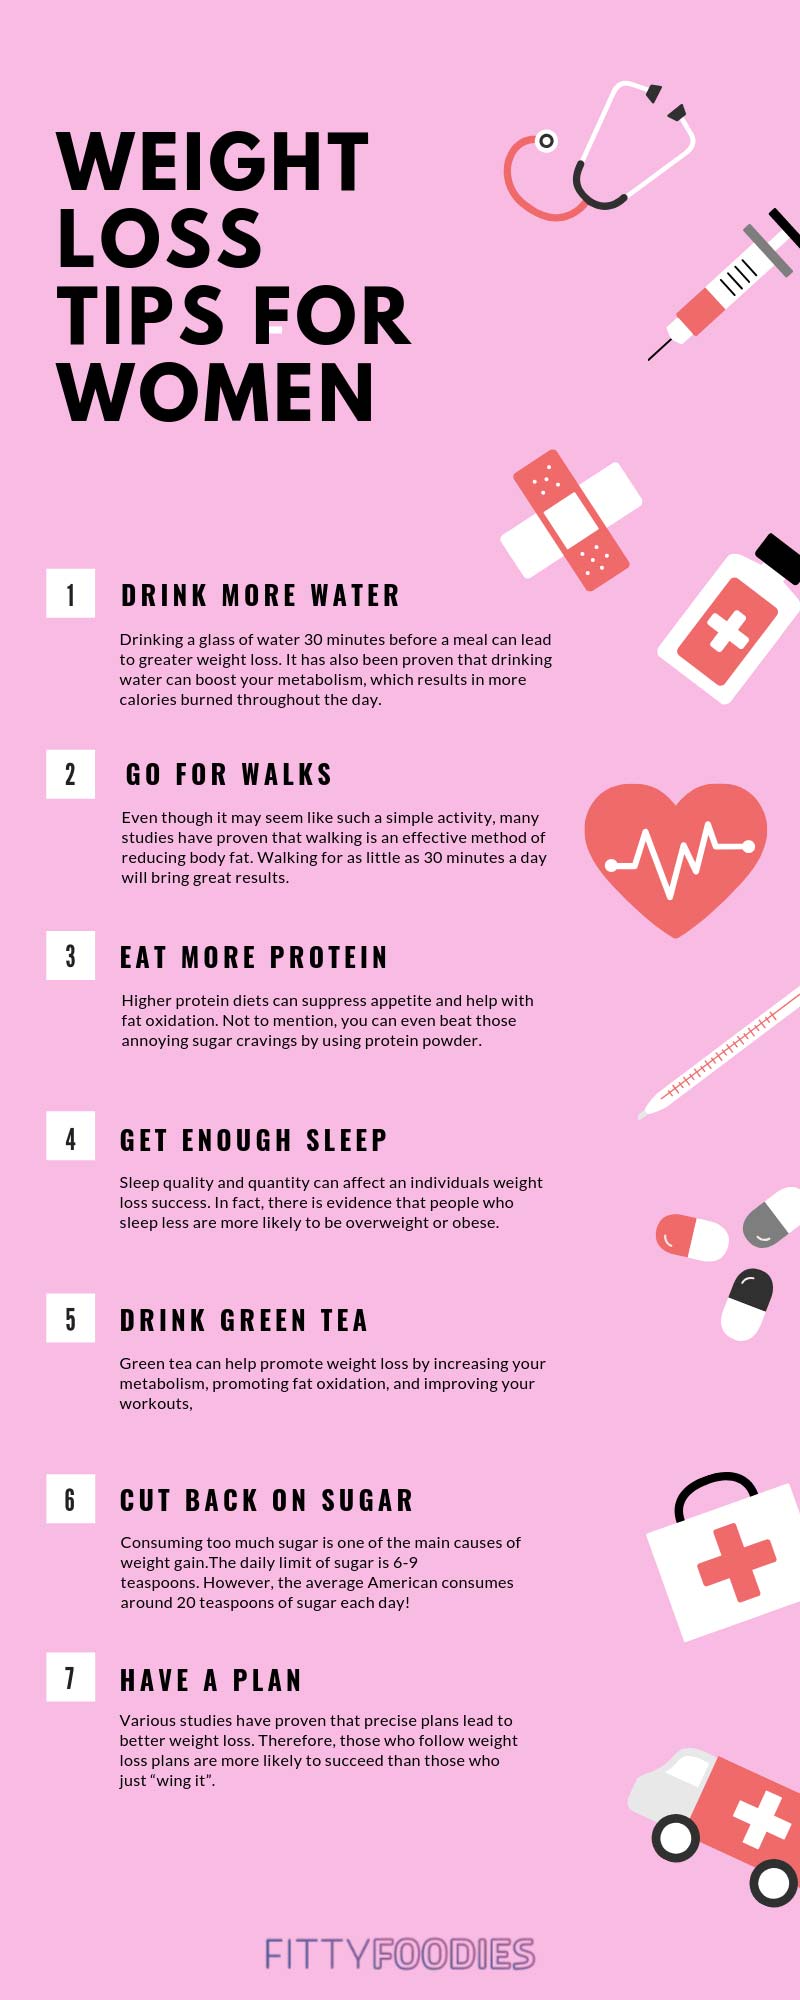 weight-loss-tips-for-women-infographic.j